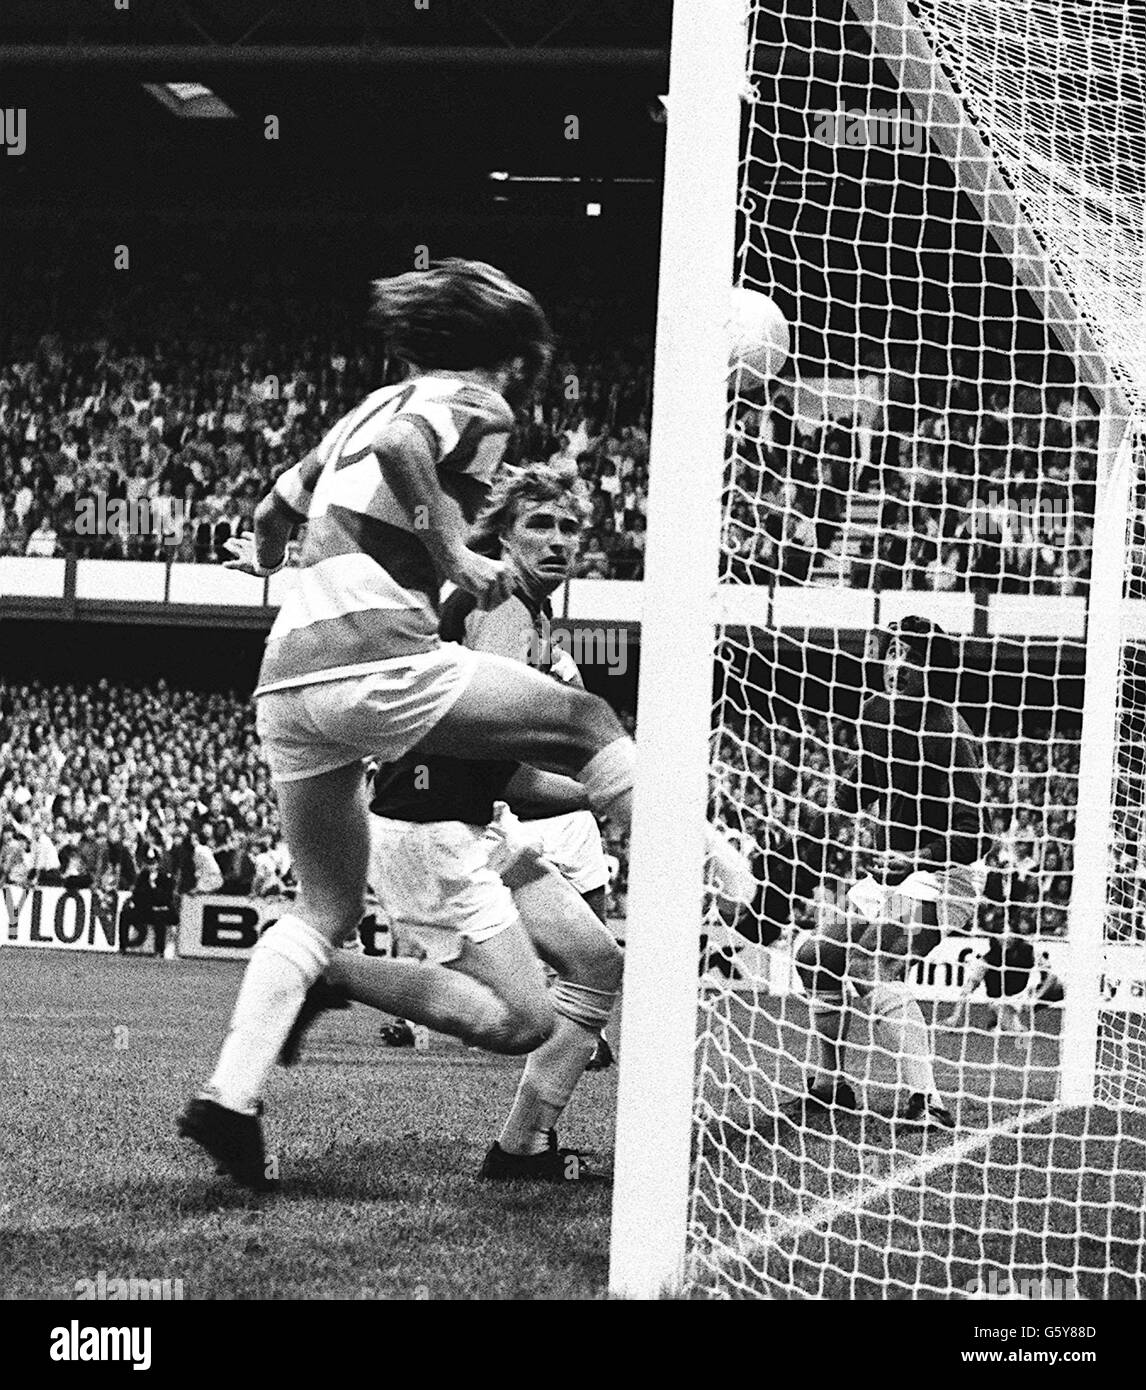 A disallowed goal headed in by Queens Park Rangers' Stan Bowles (No.10) watched by West Ham United's Kevin Lock and goalkeeper Bobby Ferguson, during a League Division One game at Rangers stadium, Shepherds Bush. Stock Photo